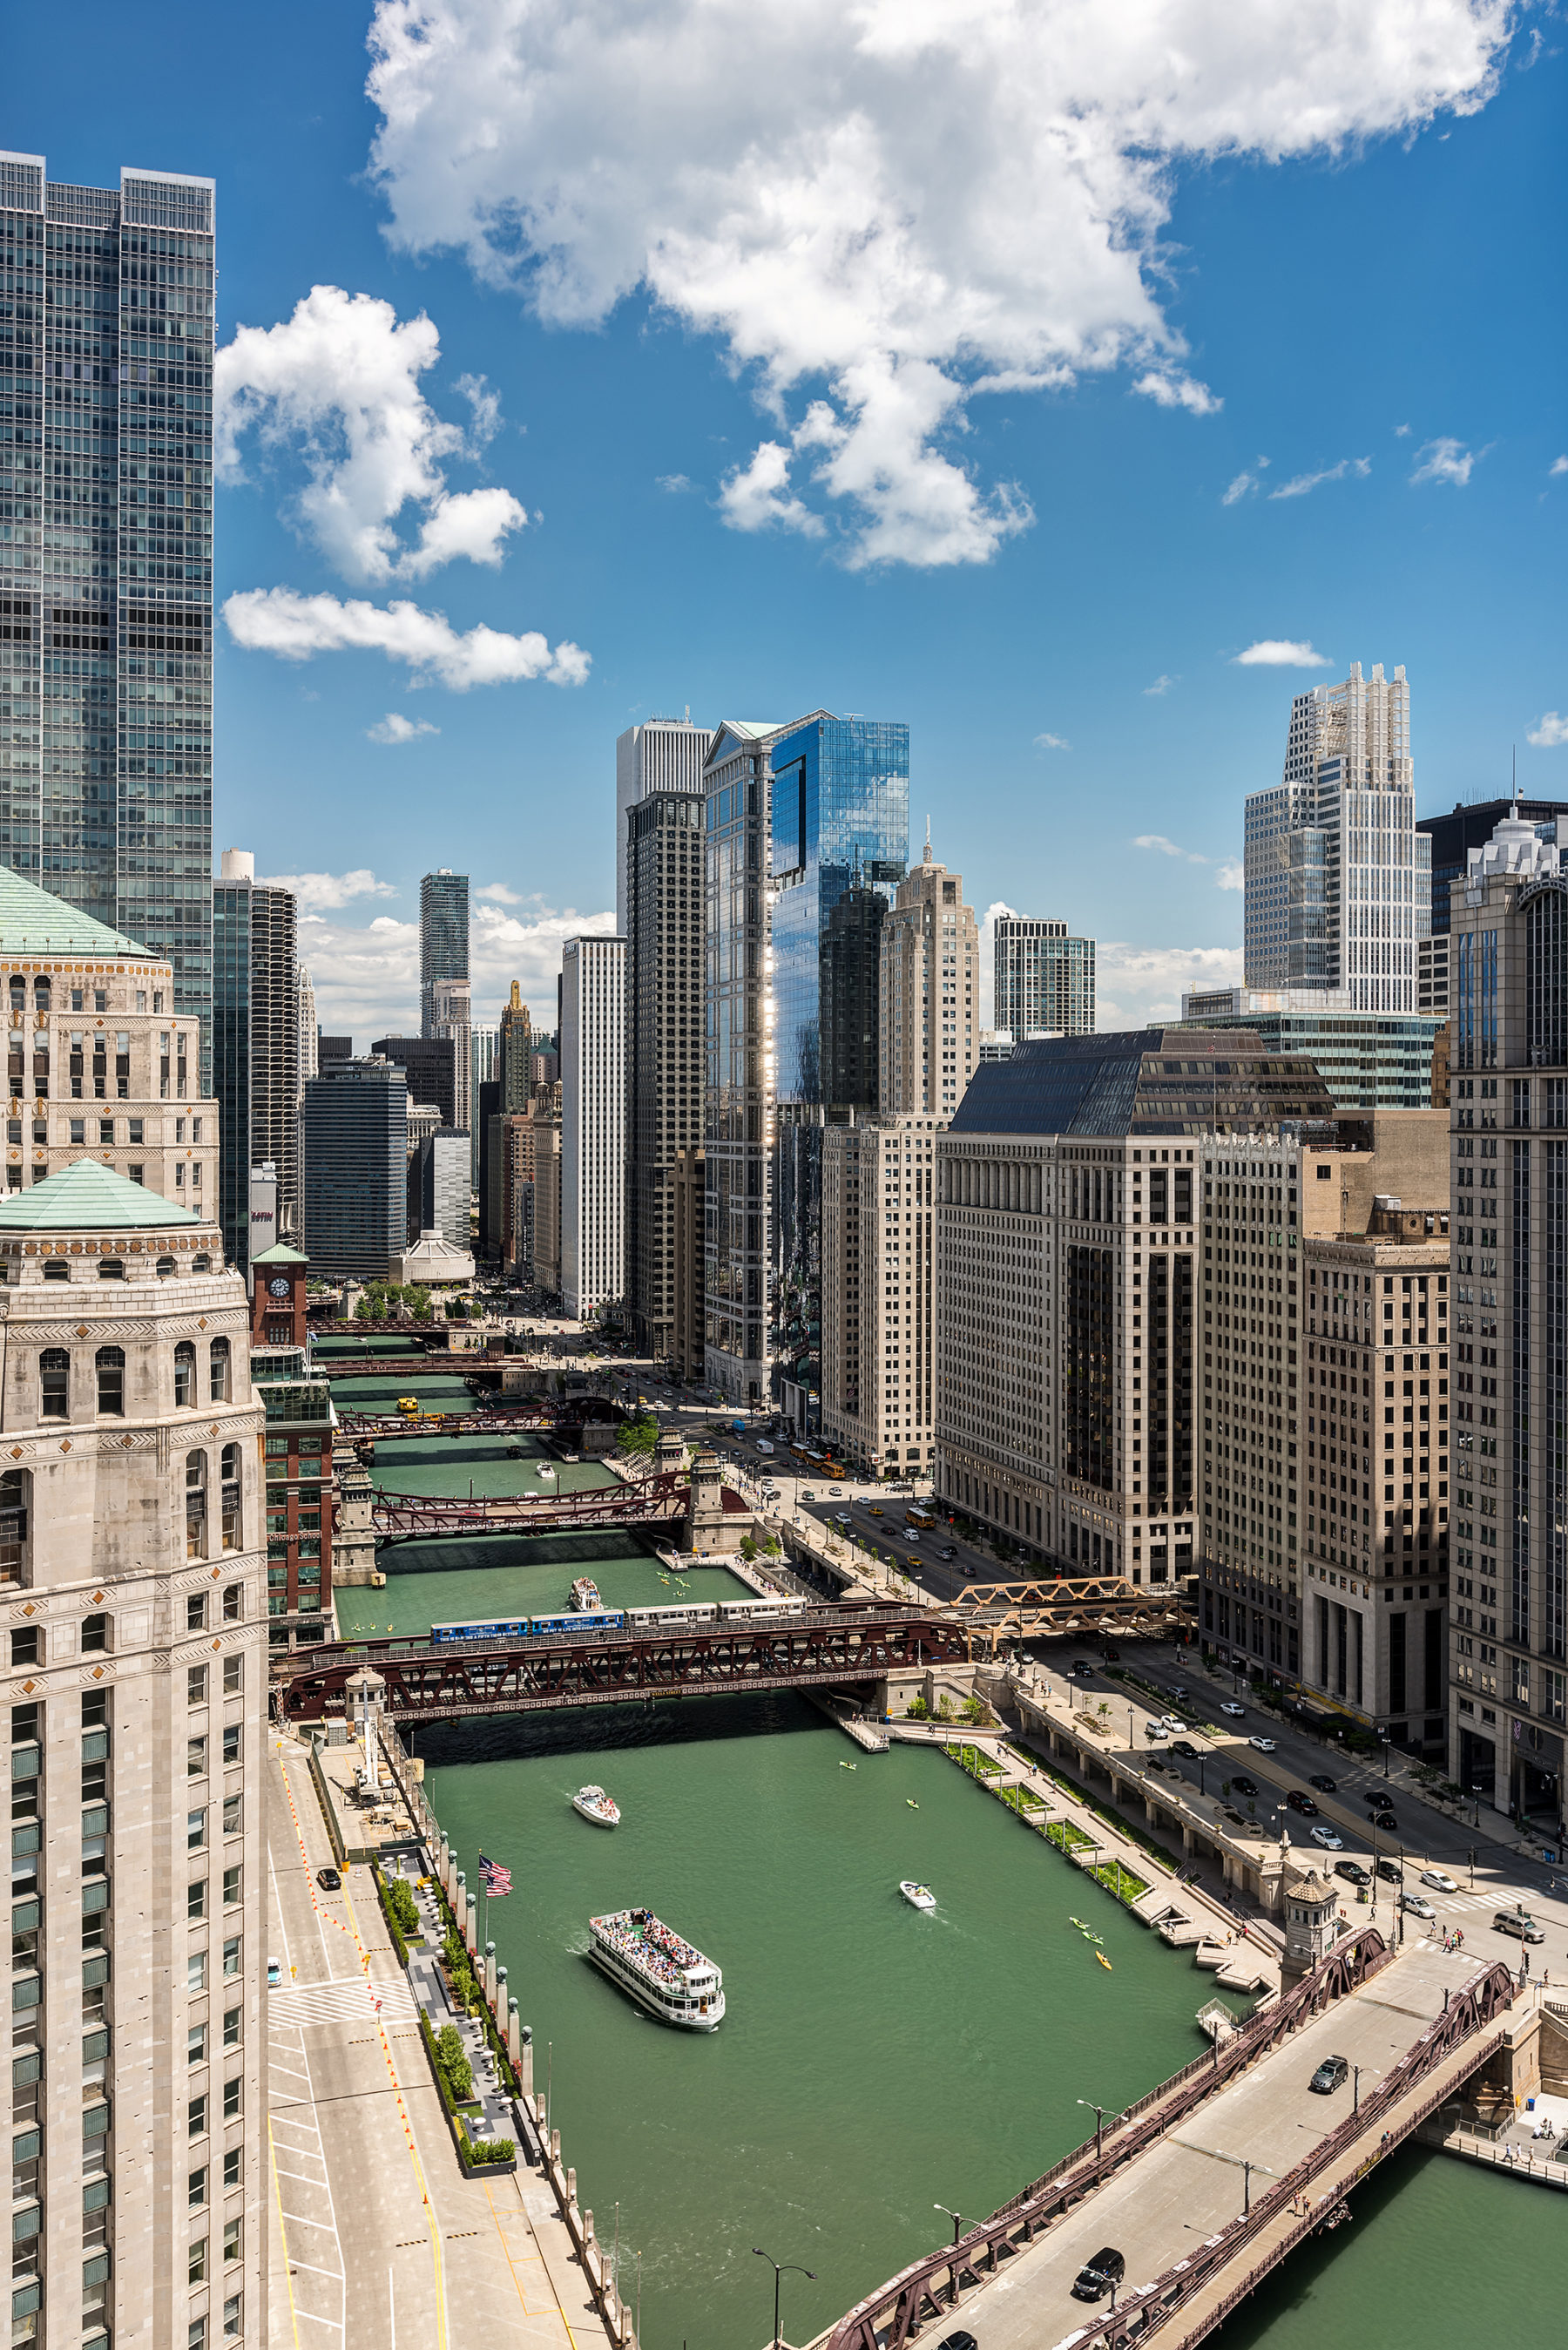 Image of chicago riverwalk from above with boats